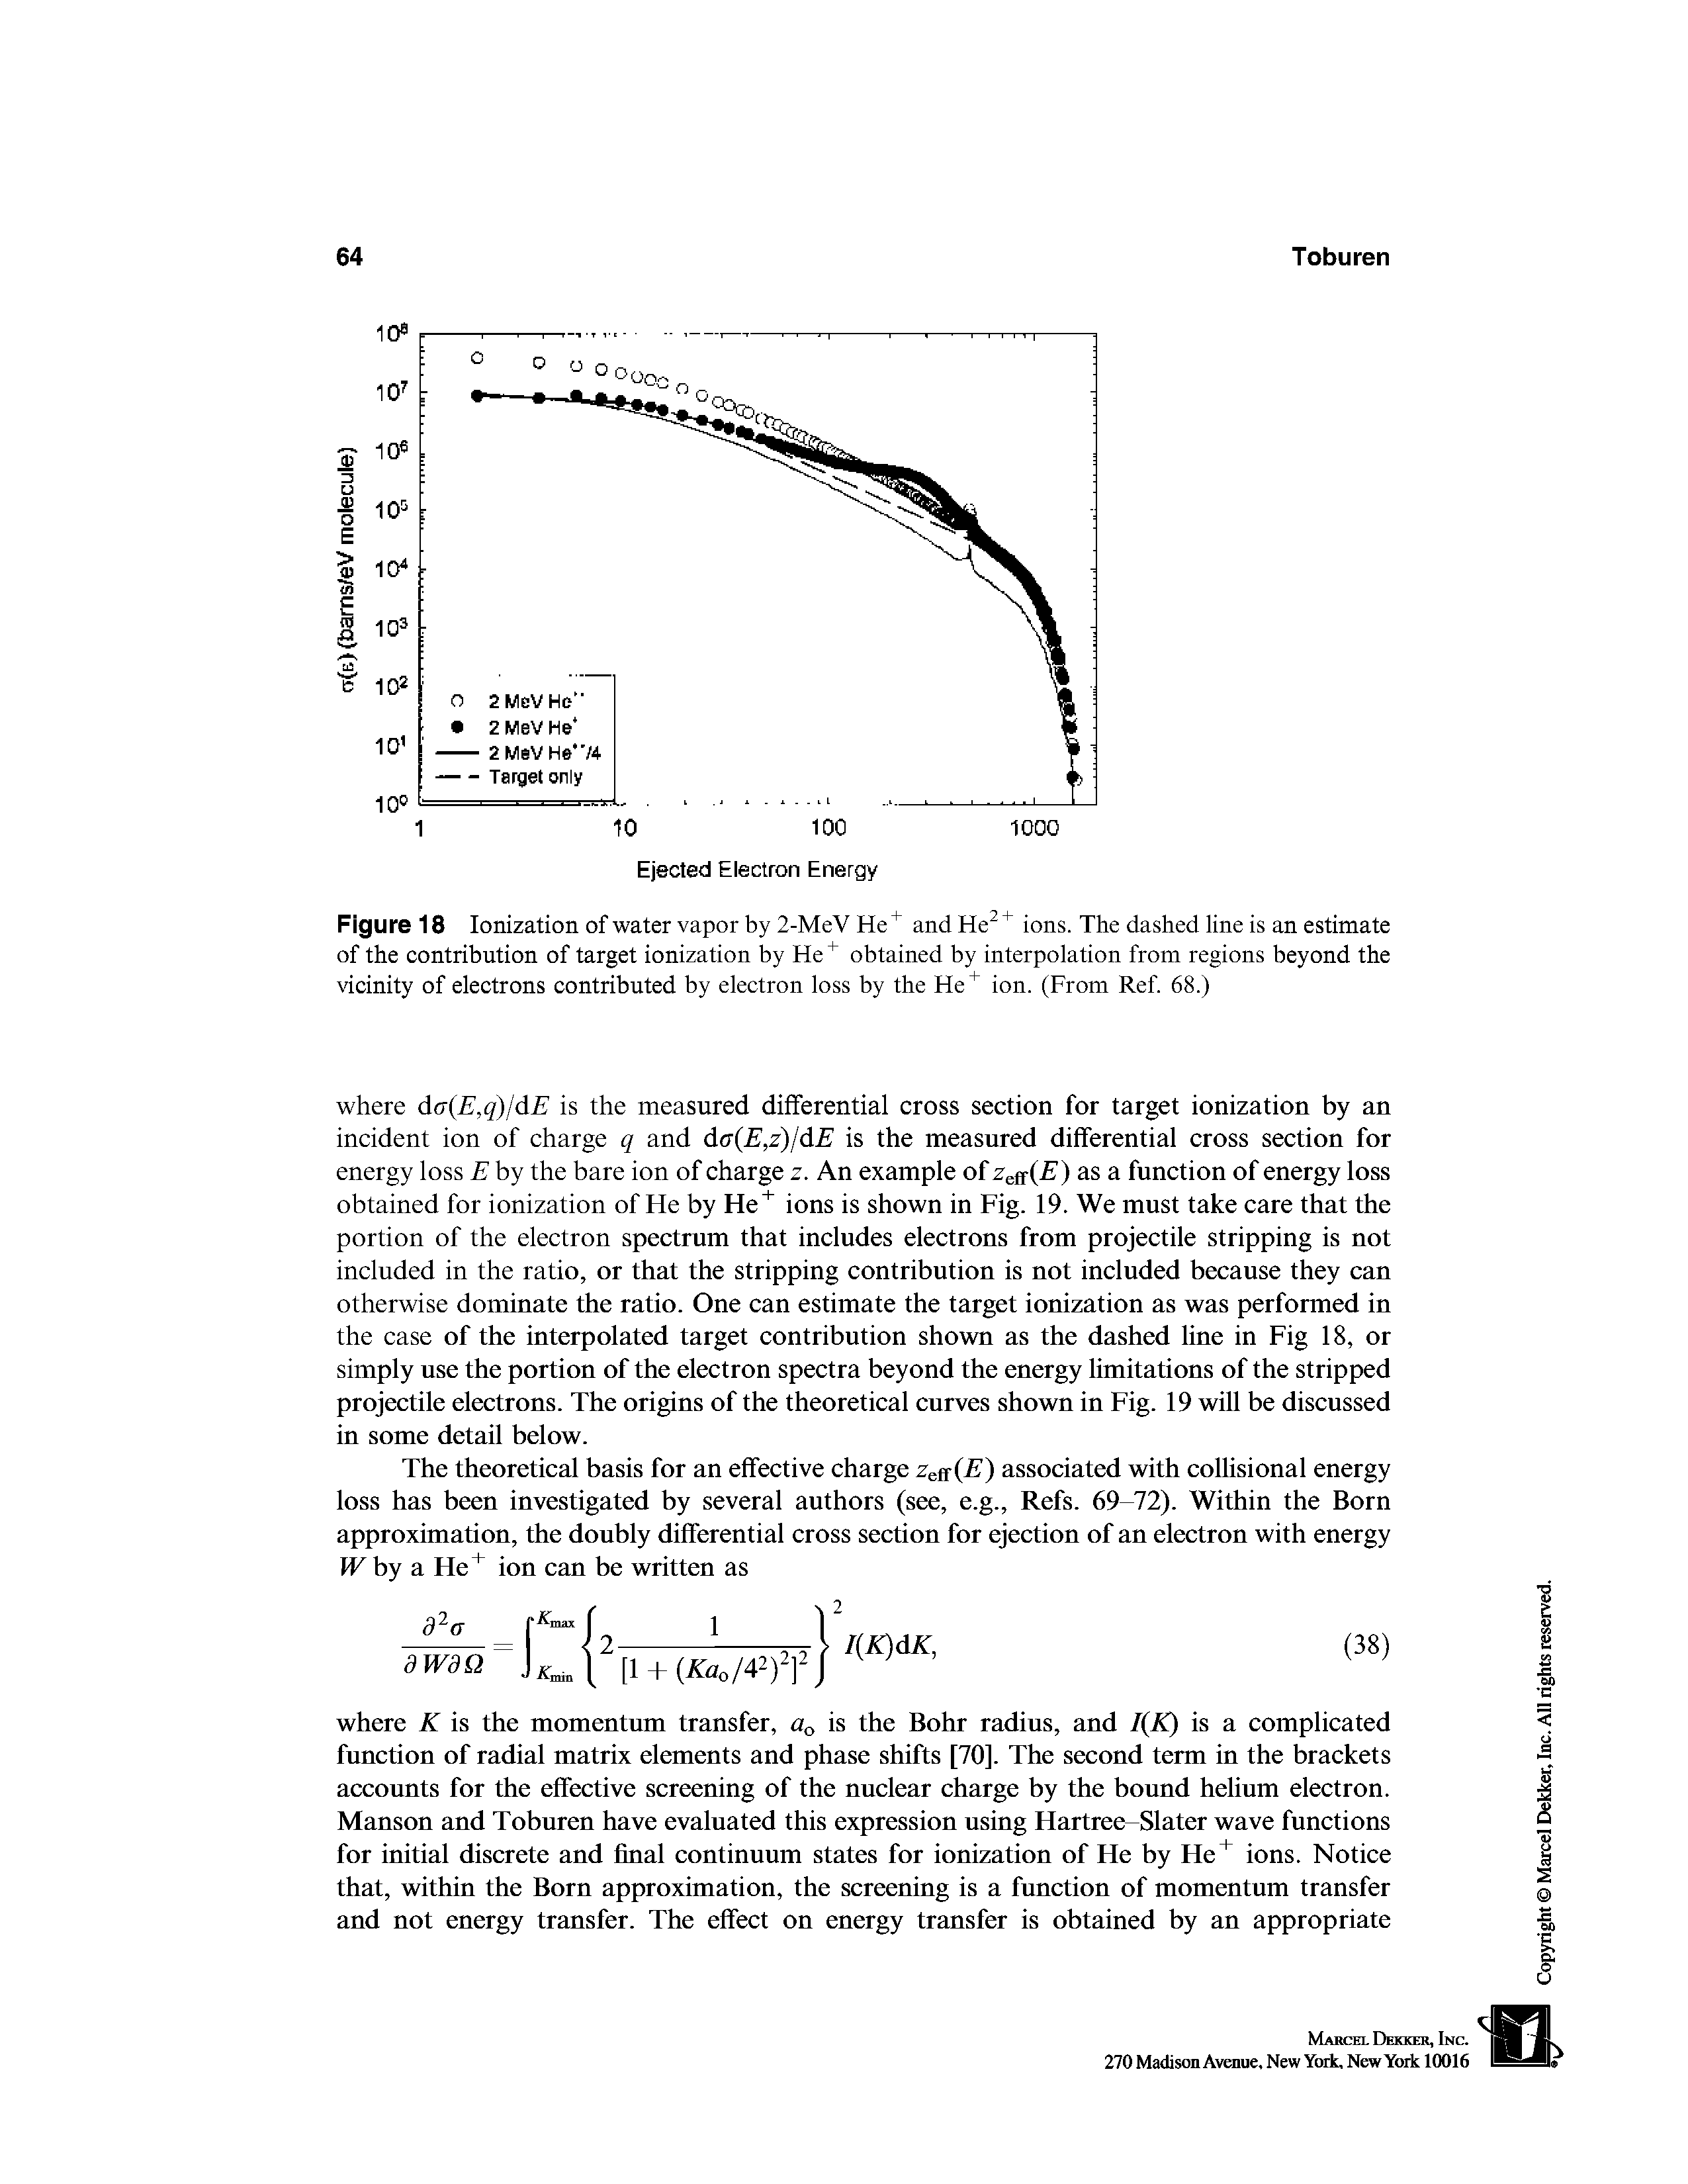 Figure 18 Ionization of water vapor by 2-MeV He and ions. The dashed line is an estimate of the contribution of target ionization by He obtained by interpolation from regions beyond the vicinity of electrons contributed by electron loss by the He ion. (From Ref. 68.)...